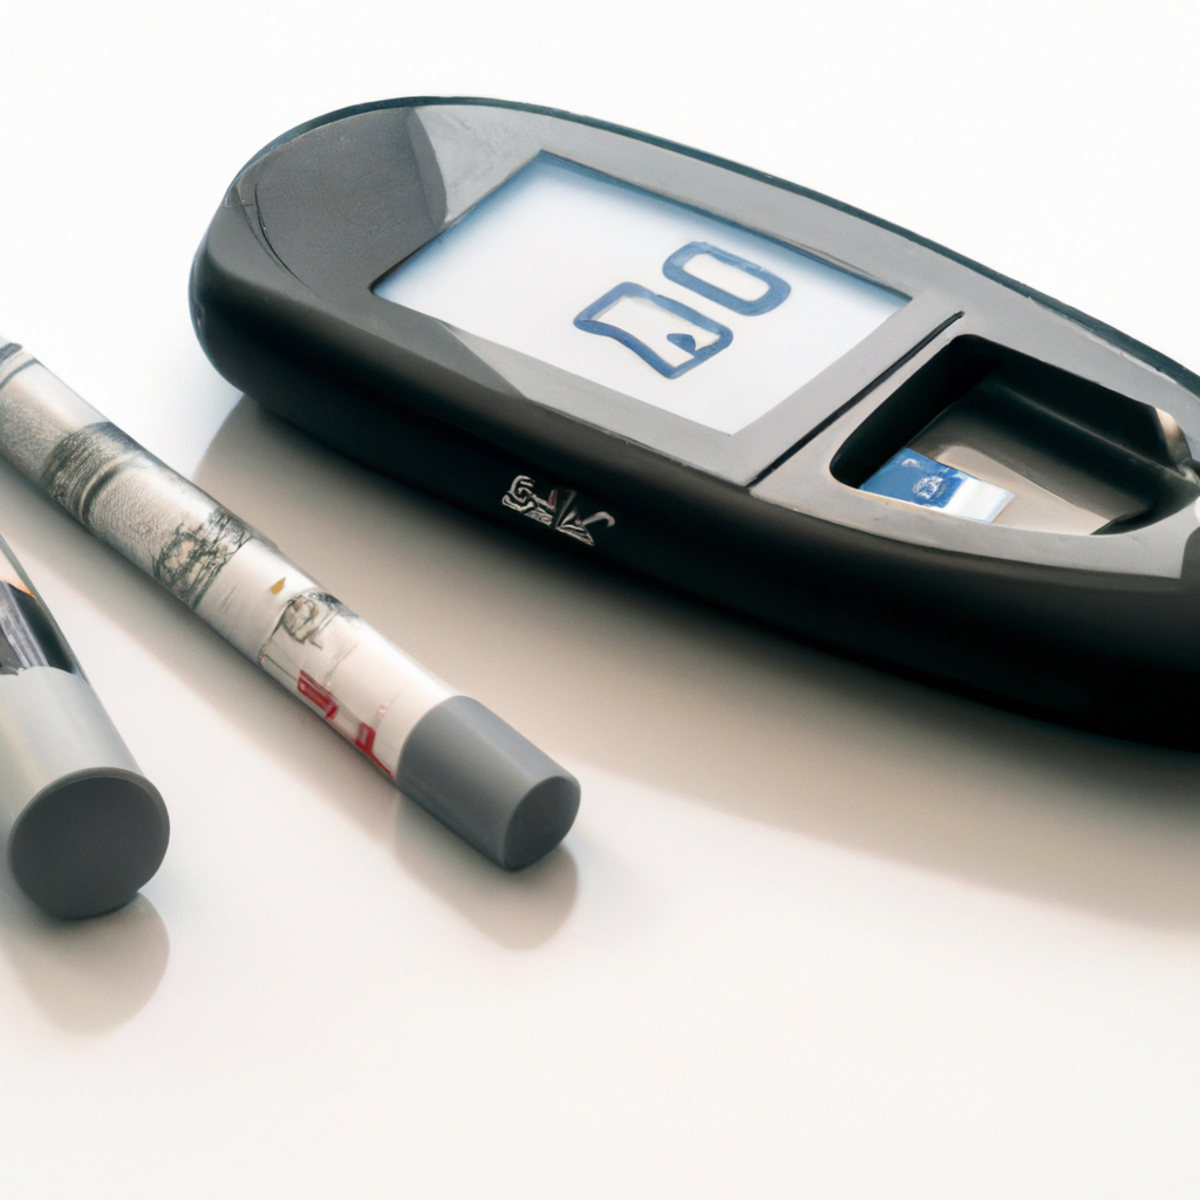 Close-up of sleek blood sugar monitor with insulin, syringe, and test strips, highlighting their role in managing diabetes and cystic fibrosis.